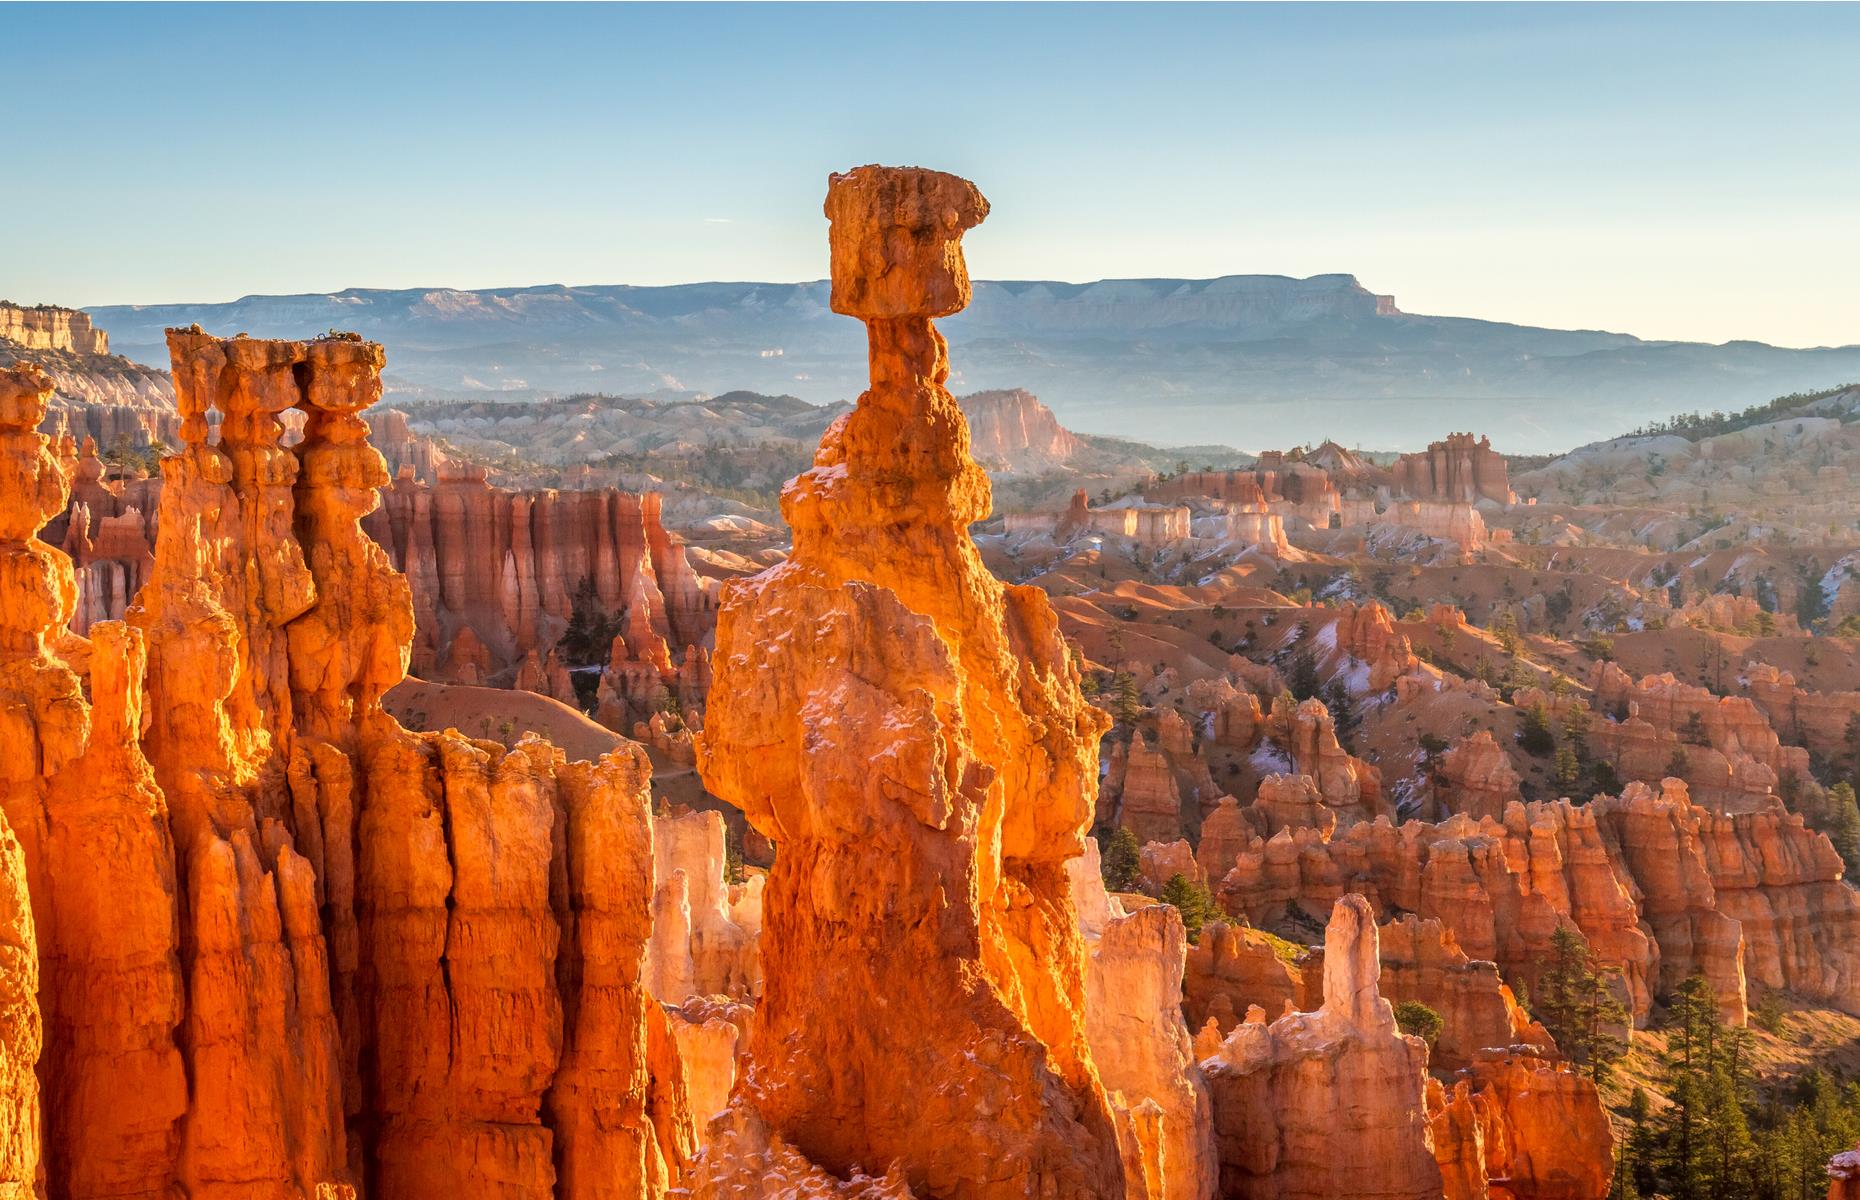 <p><a href="https://www.nps.gov/brca/index.htm">Bryce Canyon's</a> tall, spindly rock spires or hoodoos are the most distinctive feature of this otherworldly landscape, creating a jagged sprawl of apricot and cream towers. Follow hiking trails that wind beneath the strange rock formations, through forest and around the series of natural amphitheaters that make up the national park.</p>